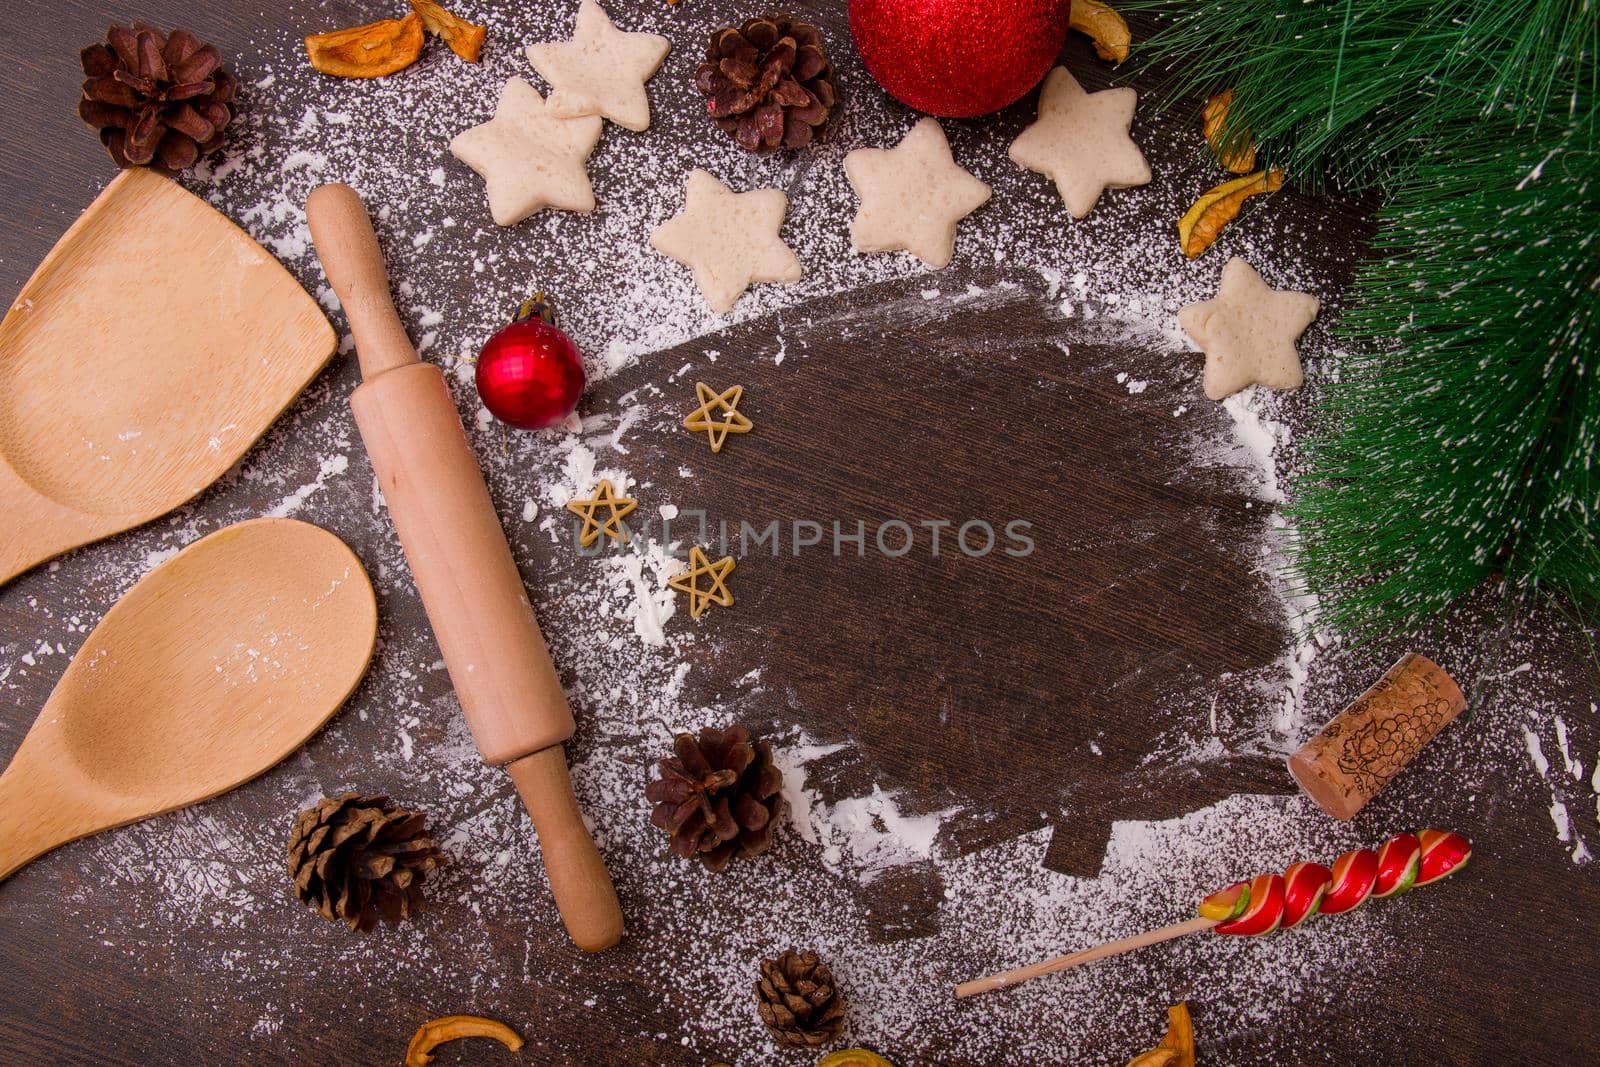 bake pastry cookies, star-cookies, wooden kitchen utensils, shovels, rolling pin, flour scattered on a brown wooden table, pine artificial branch, Christmas decorations, New Year, Christmas, holiday cooking